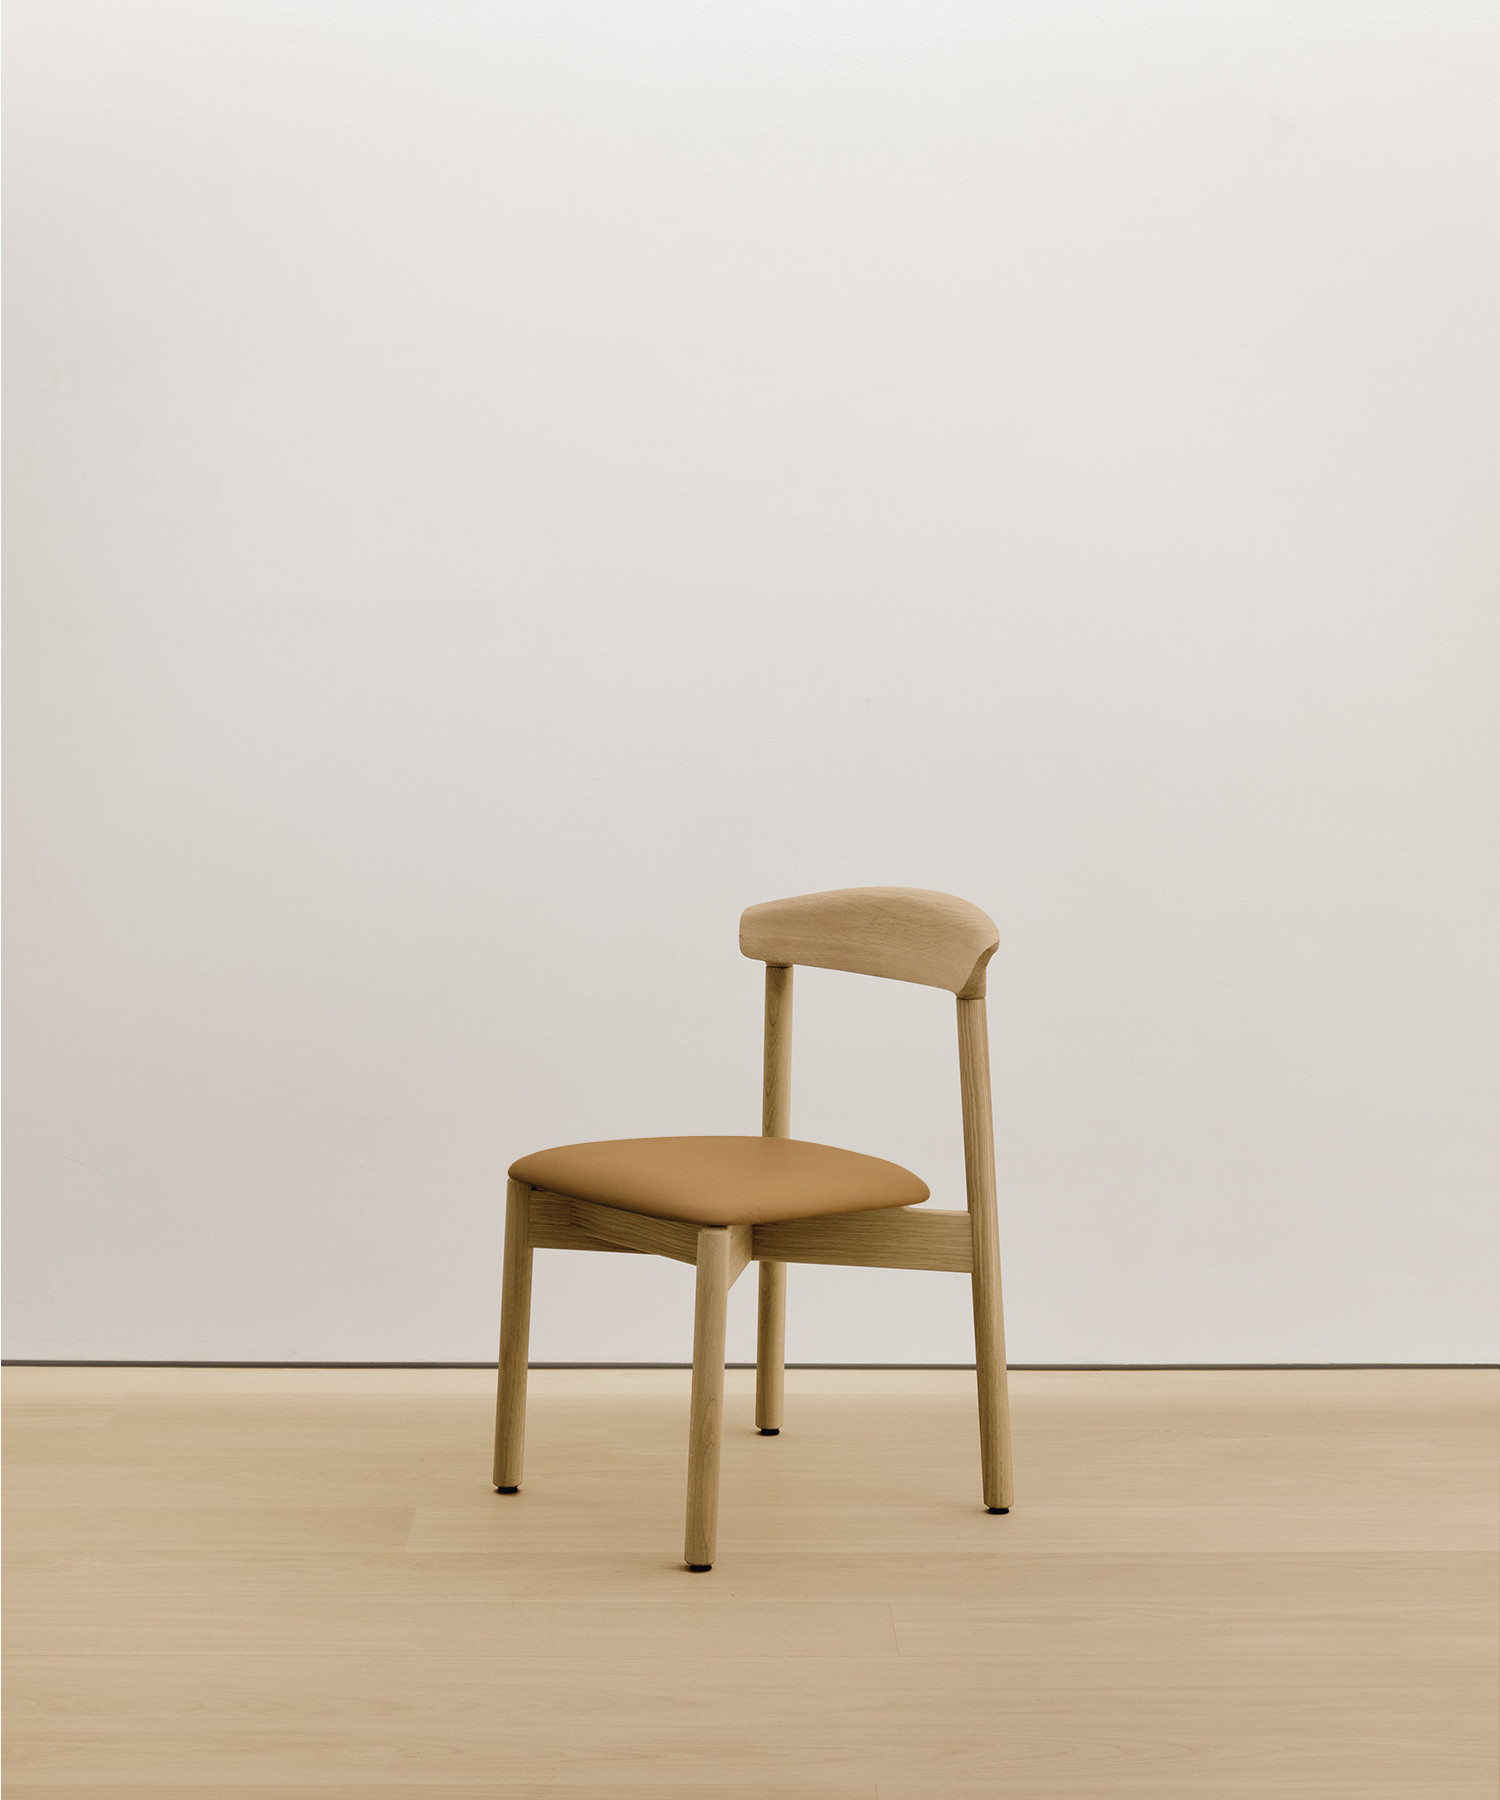   chair with solid wood seat